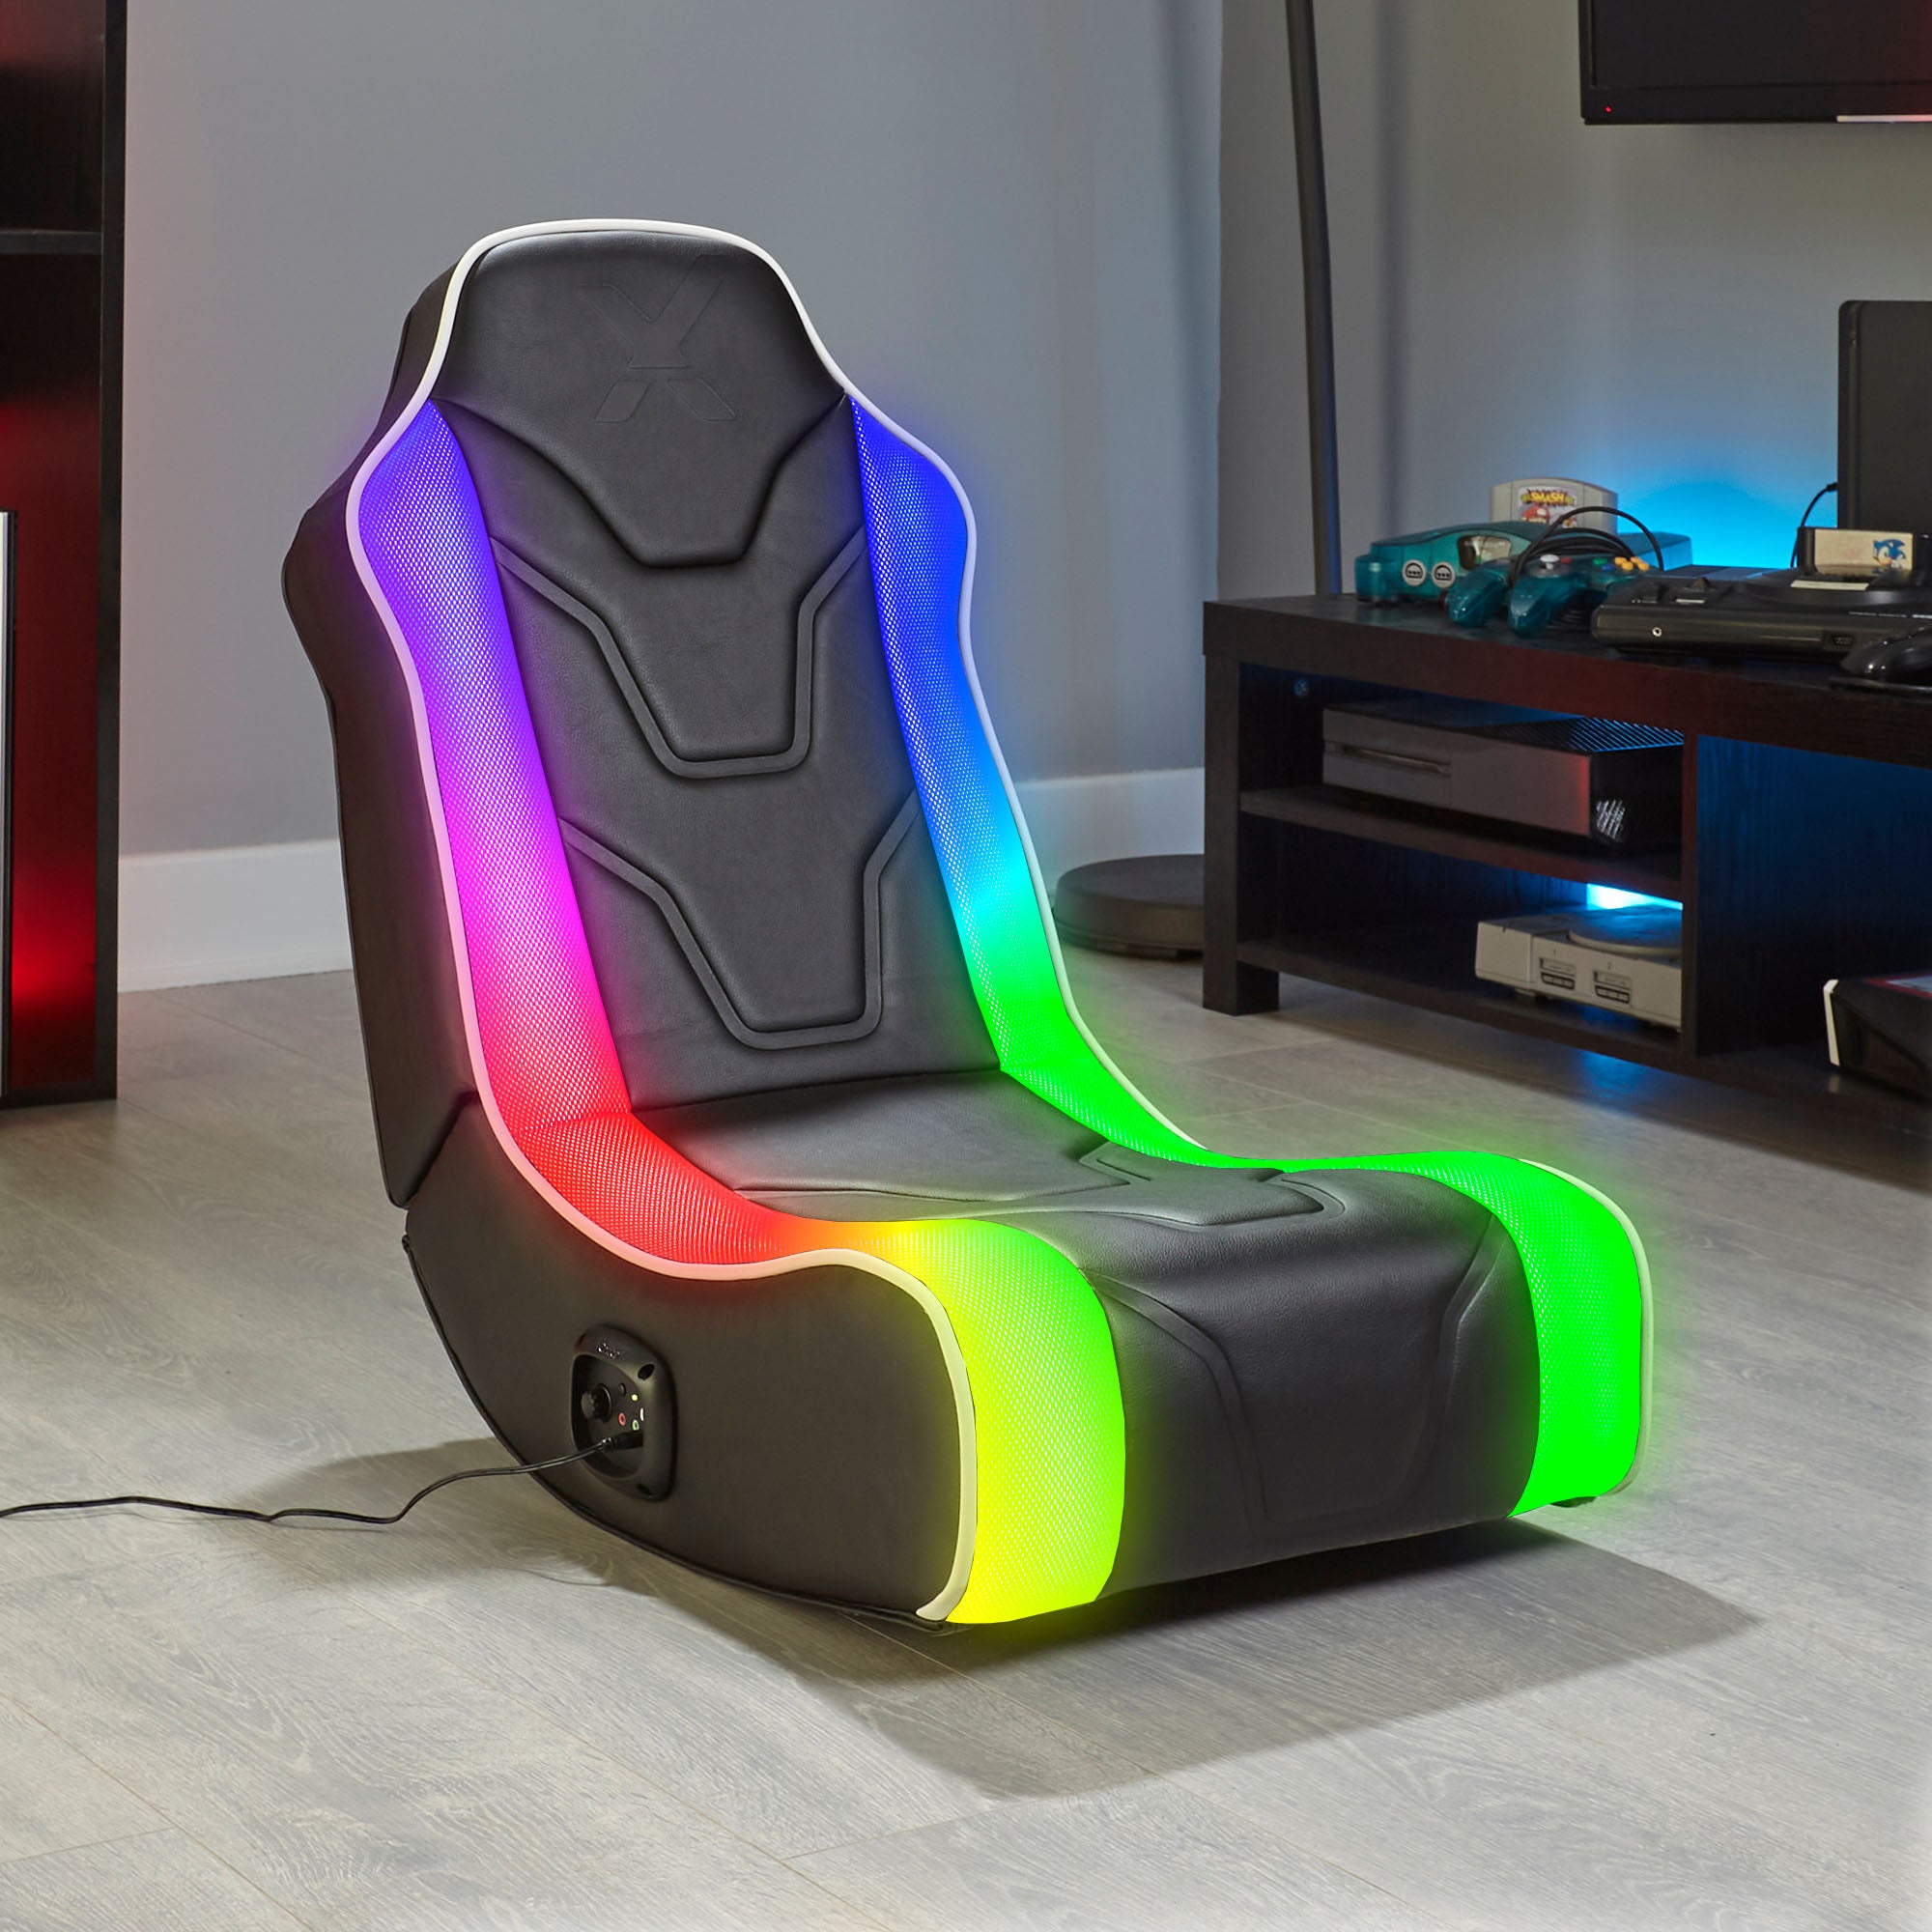 HOUSTON ASTROS GAMING CHAIR